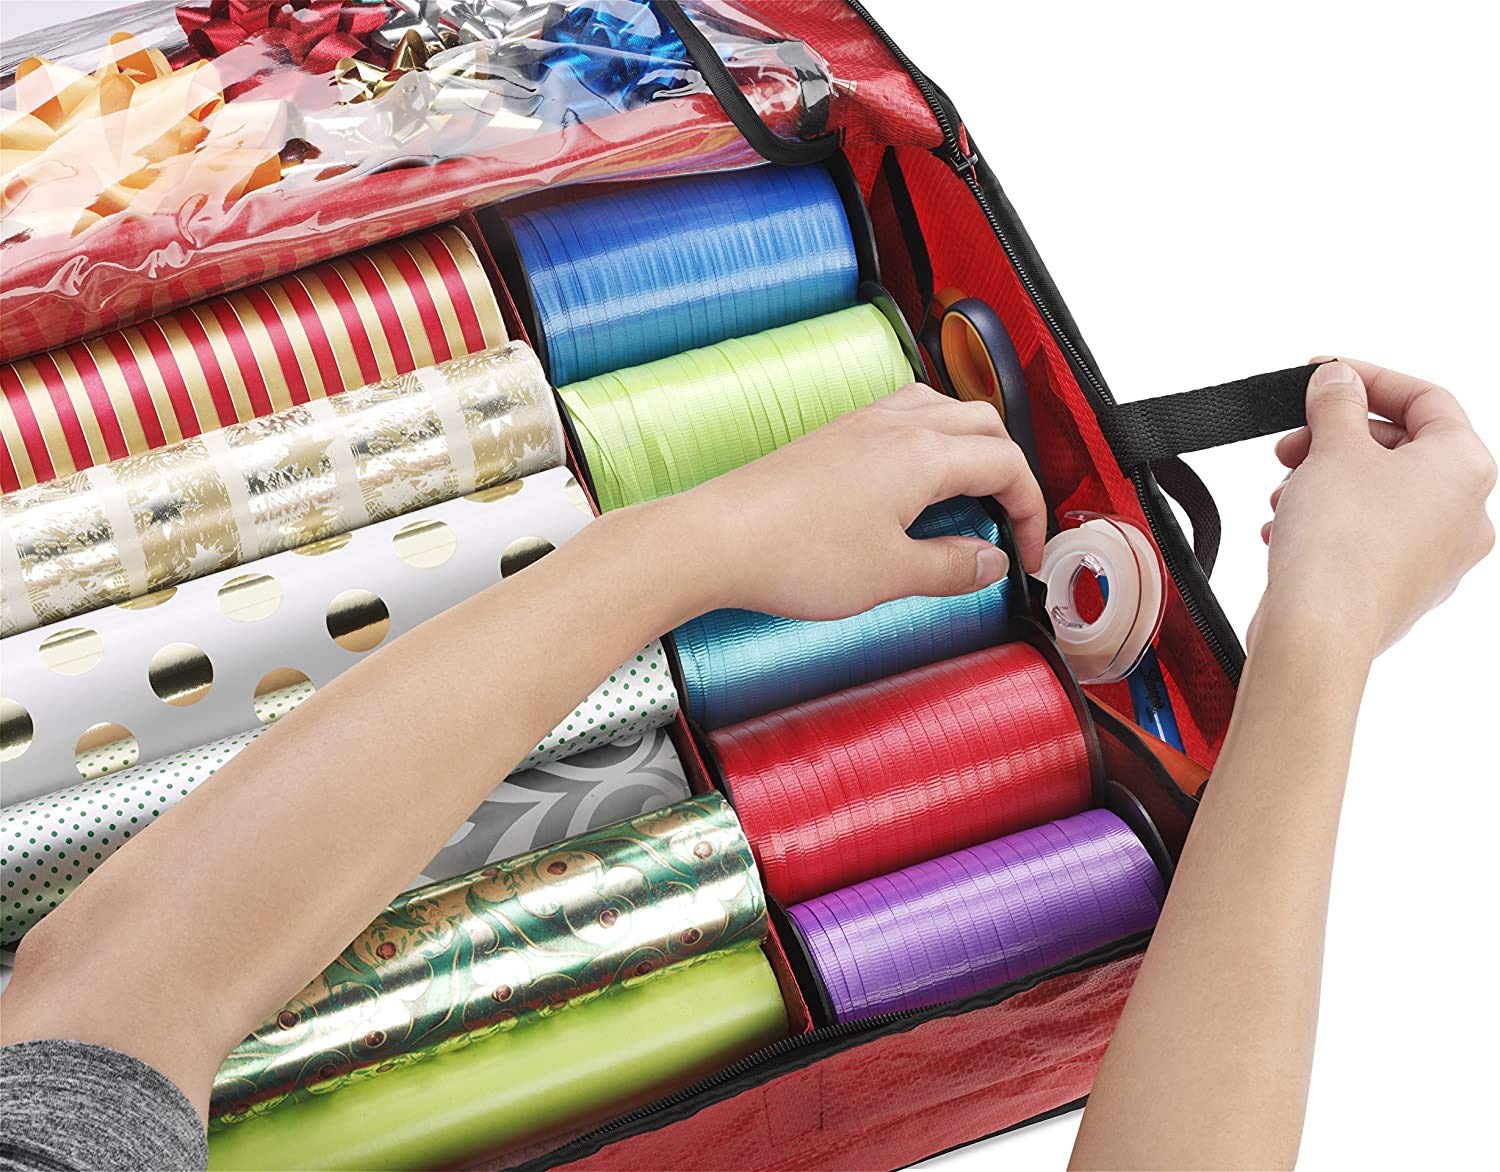 Christmas Storage Organizer � Spacious Under-bed Holiday Wrapping Paper Container �Perfect for Gift Wrap, Bags, Ribbons, Bows, Cards, Wrapping Supplies and Many More  - Very Good